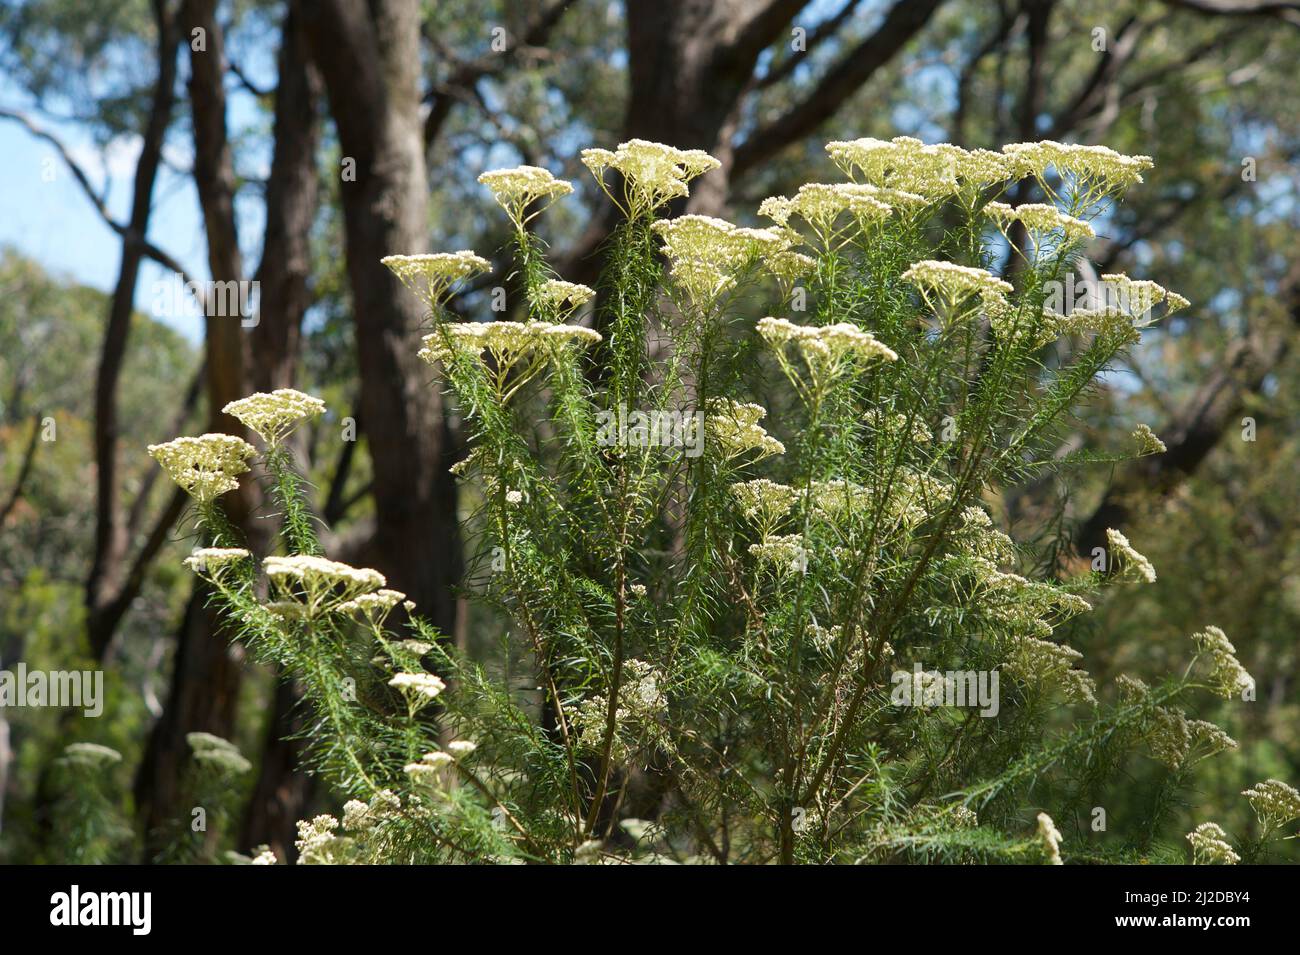 Dogwood is one of the most common plants in Australia. This is Shiny Dogwood (Cassinia Longifolia), which has longer leaves than Common Dogwood. Stock Photo